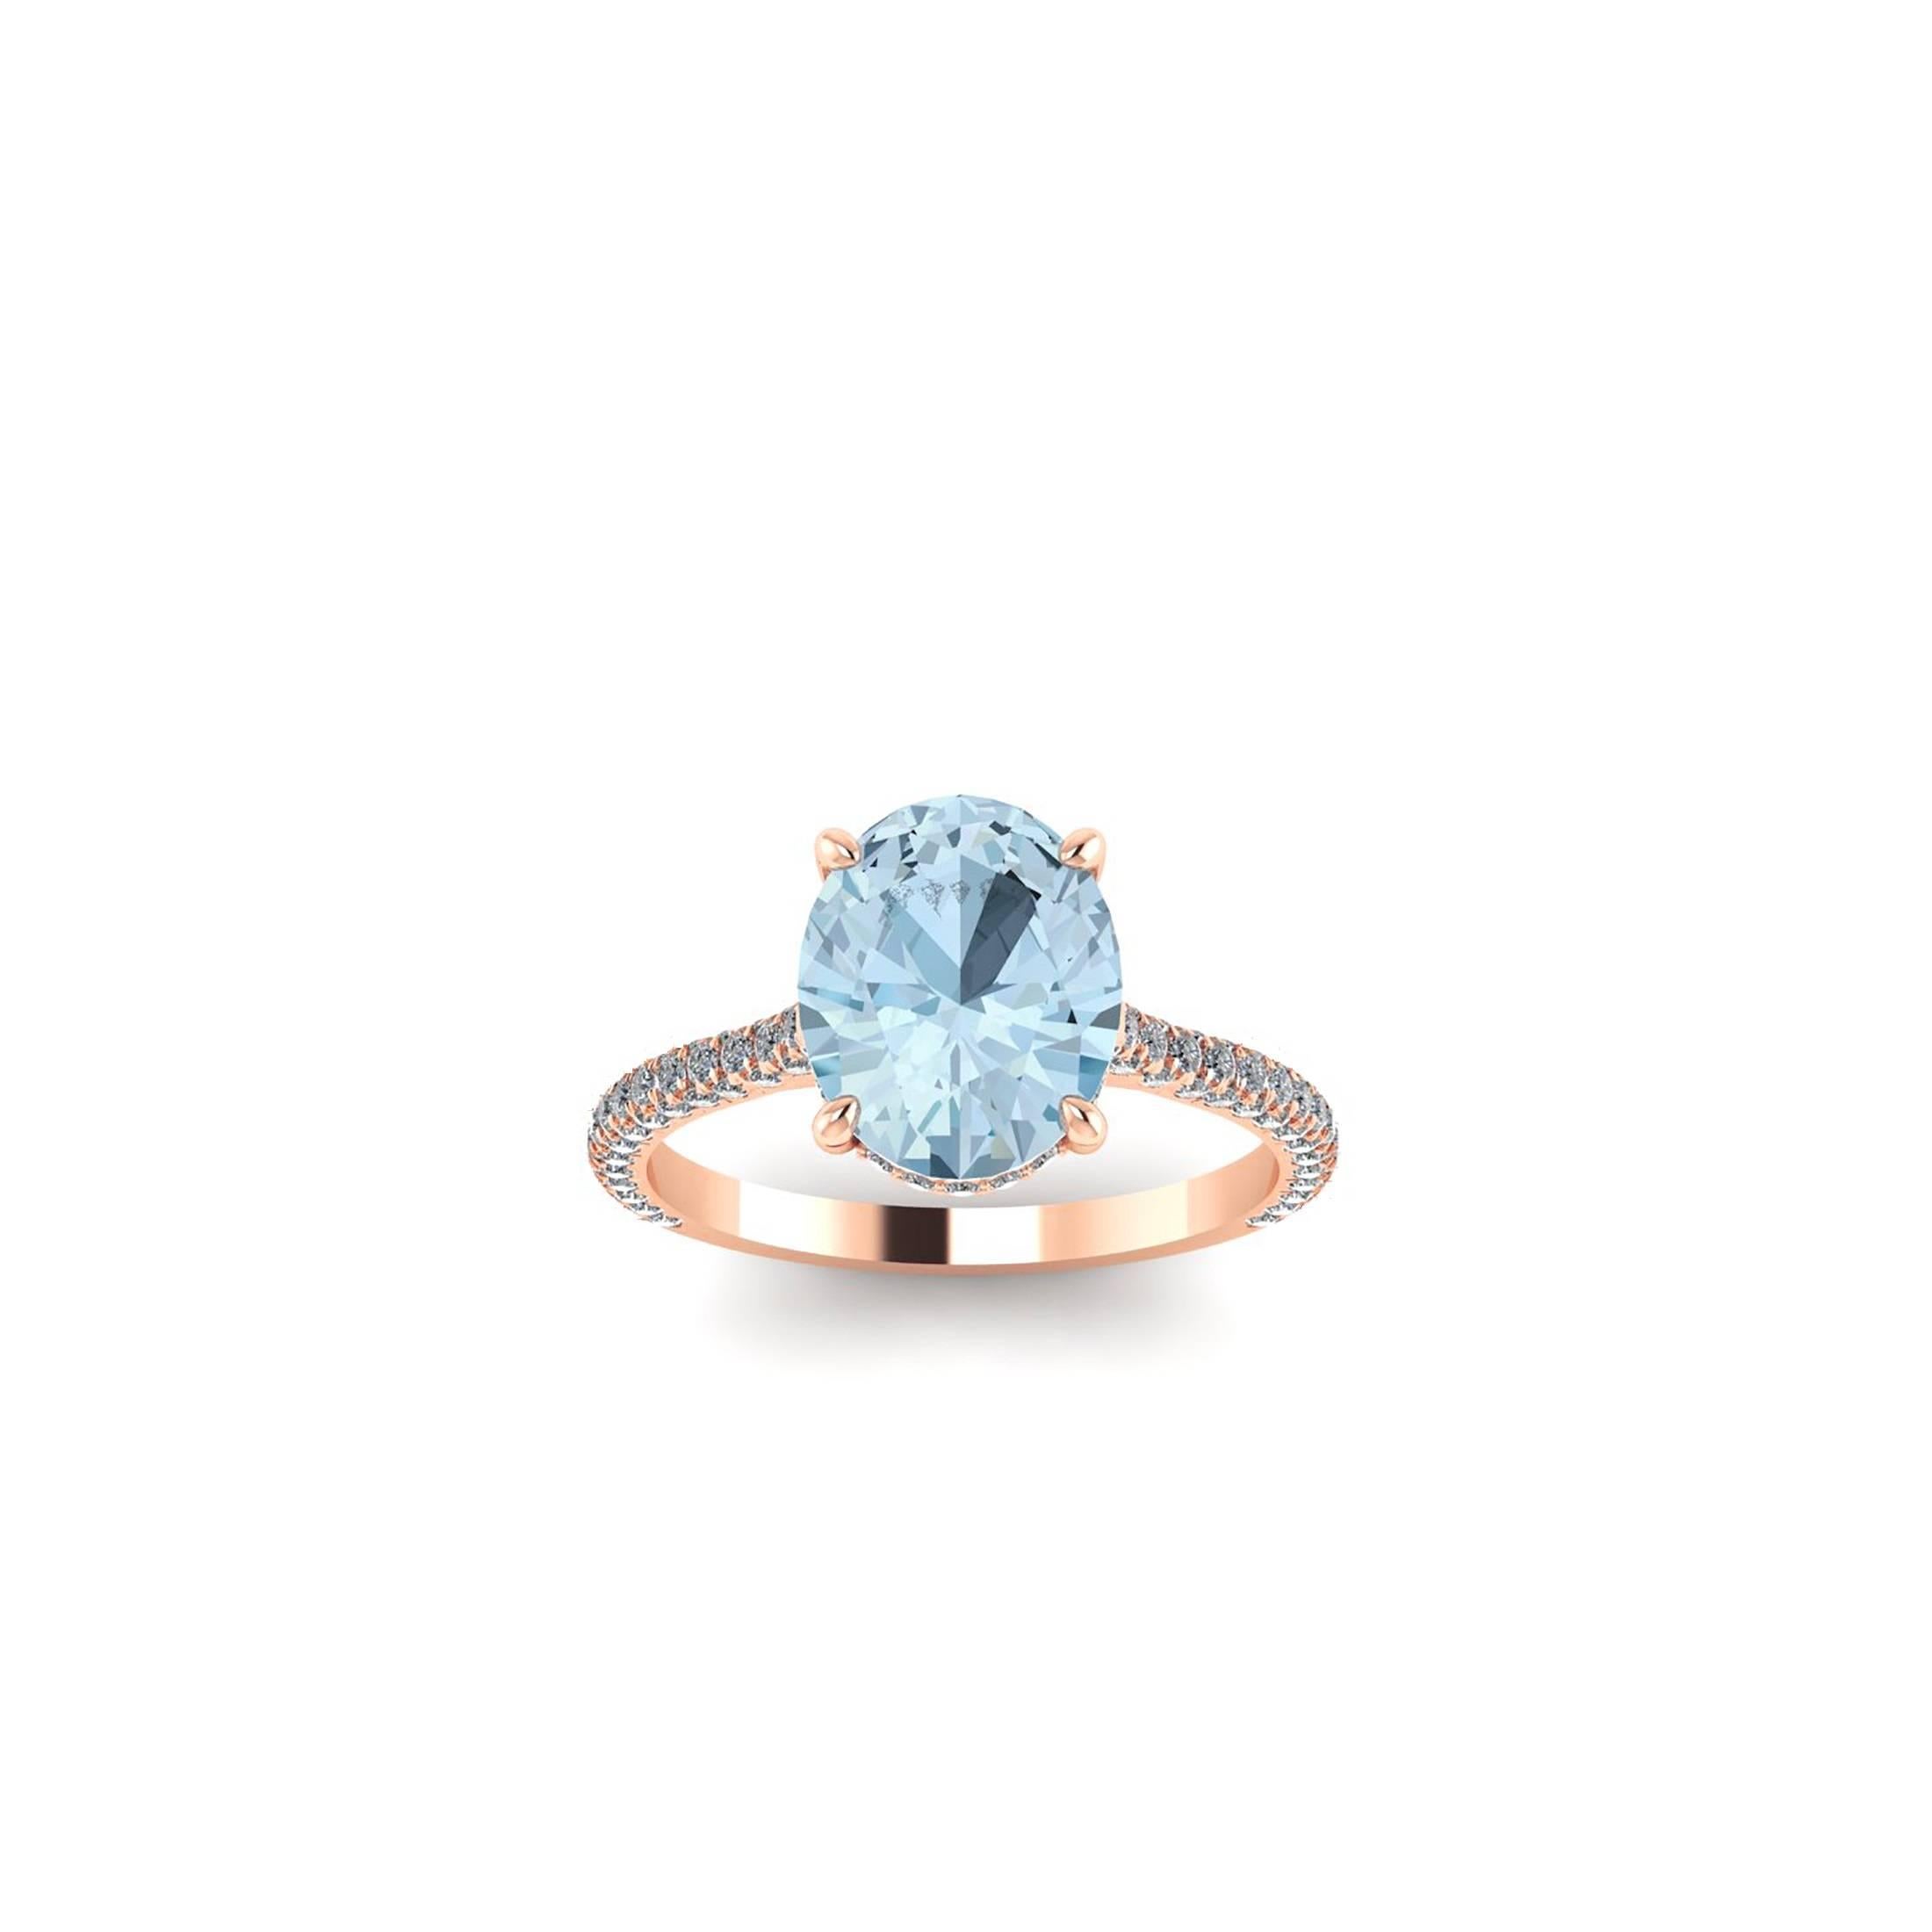 2.22 carat blue Aquamarine, hand cut, set on a 18k rose gold ring, 
adorned by white round diamonds, hand set, for an approximate 0.50 carats, for a maximum shine and sparkle.

This ring's size is 6  3/4 we offer complimentary sizing upon order in